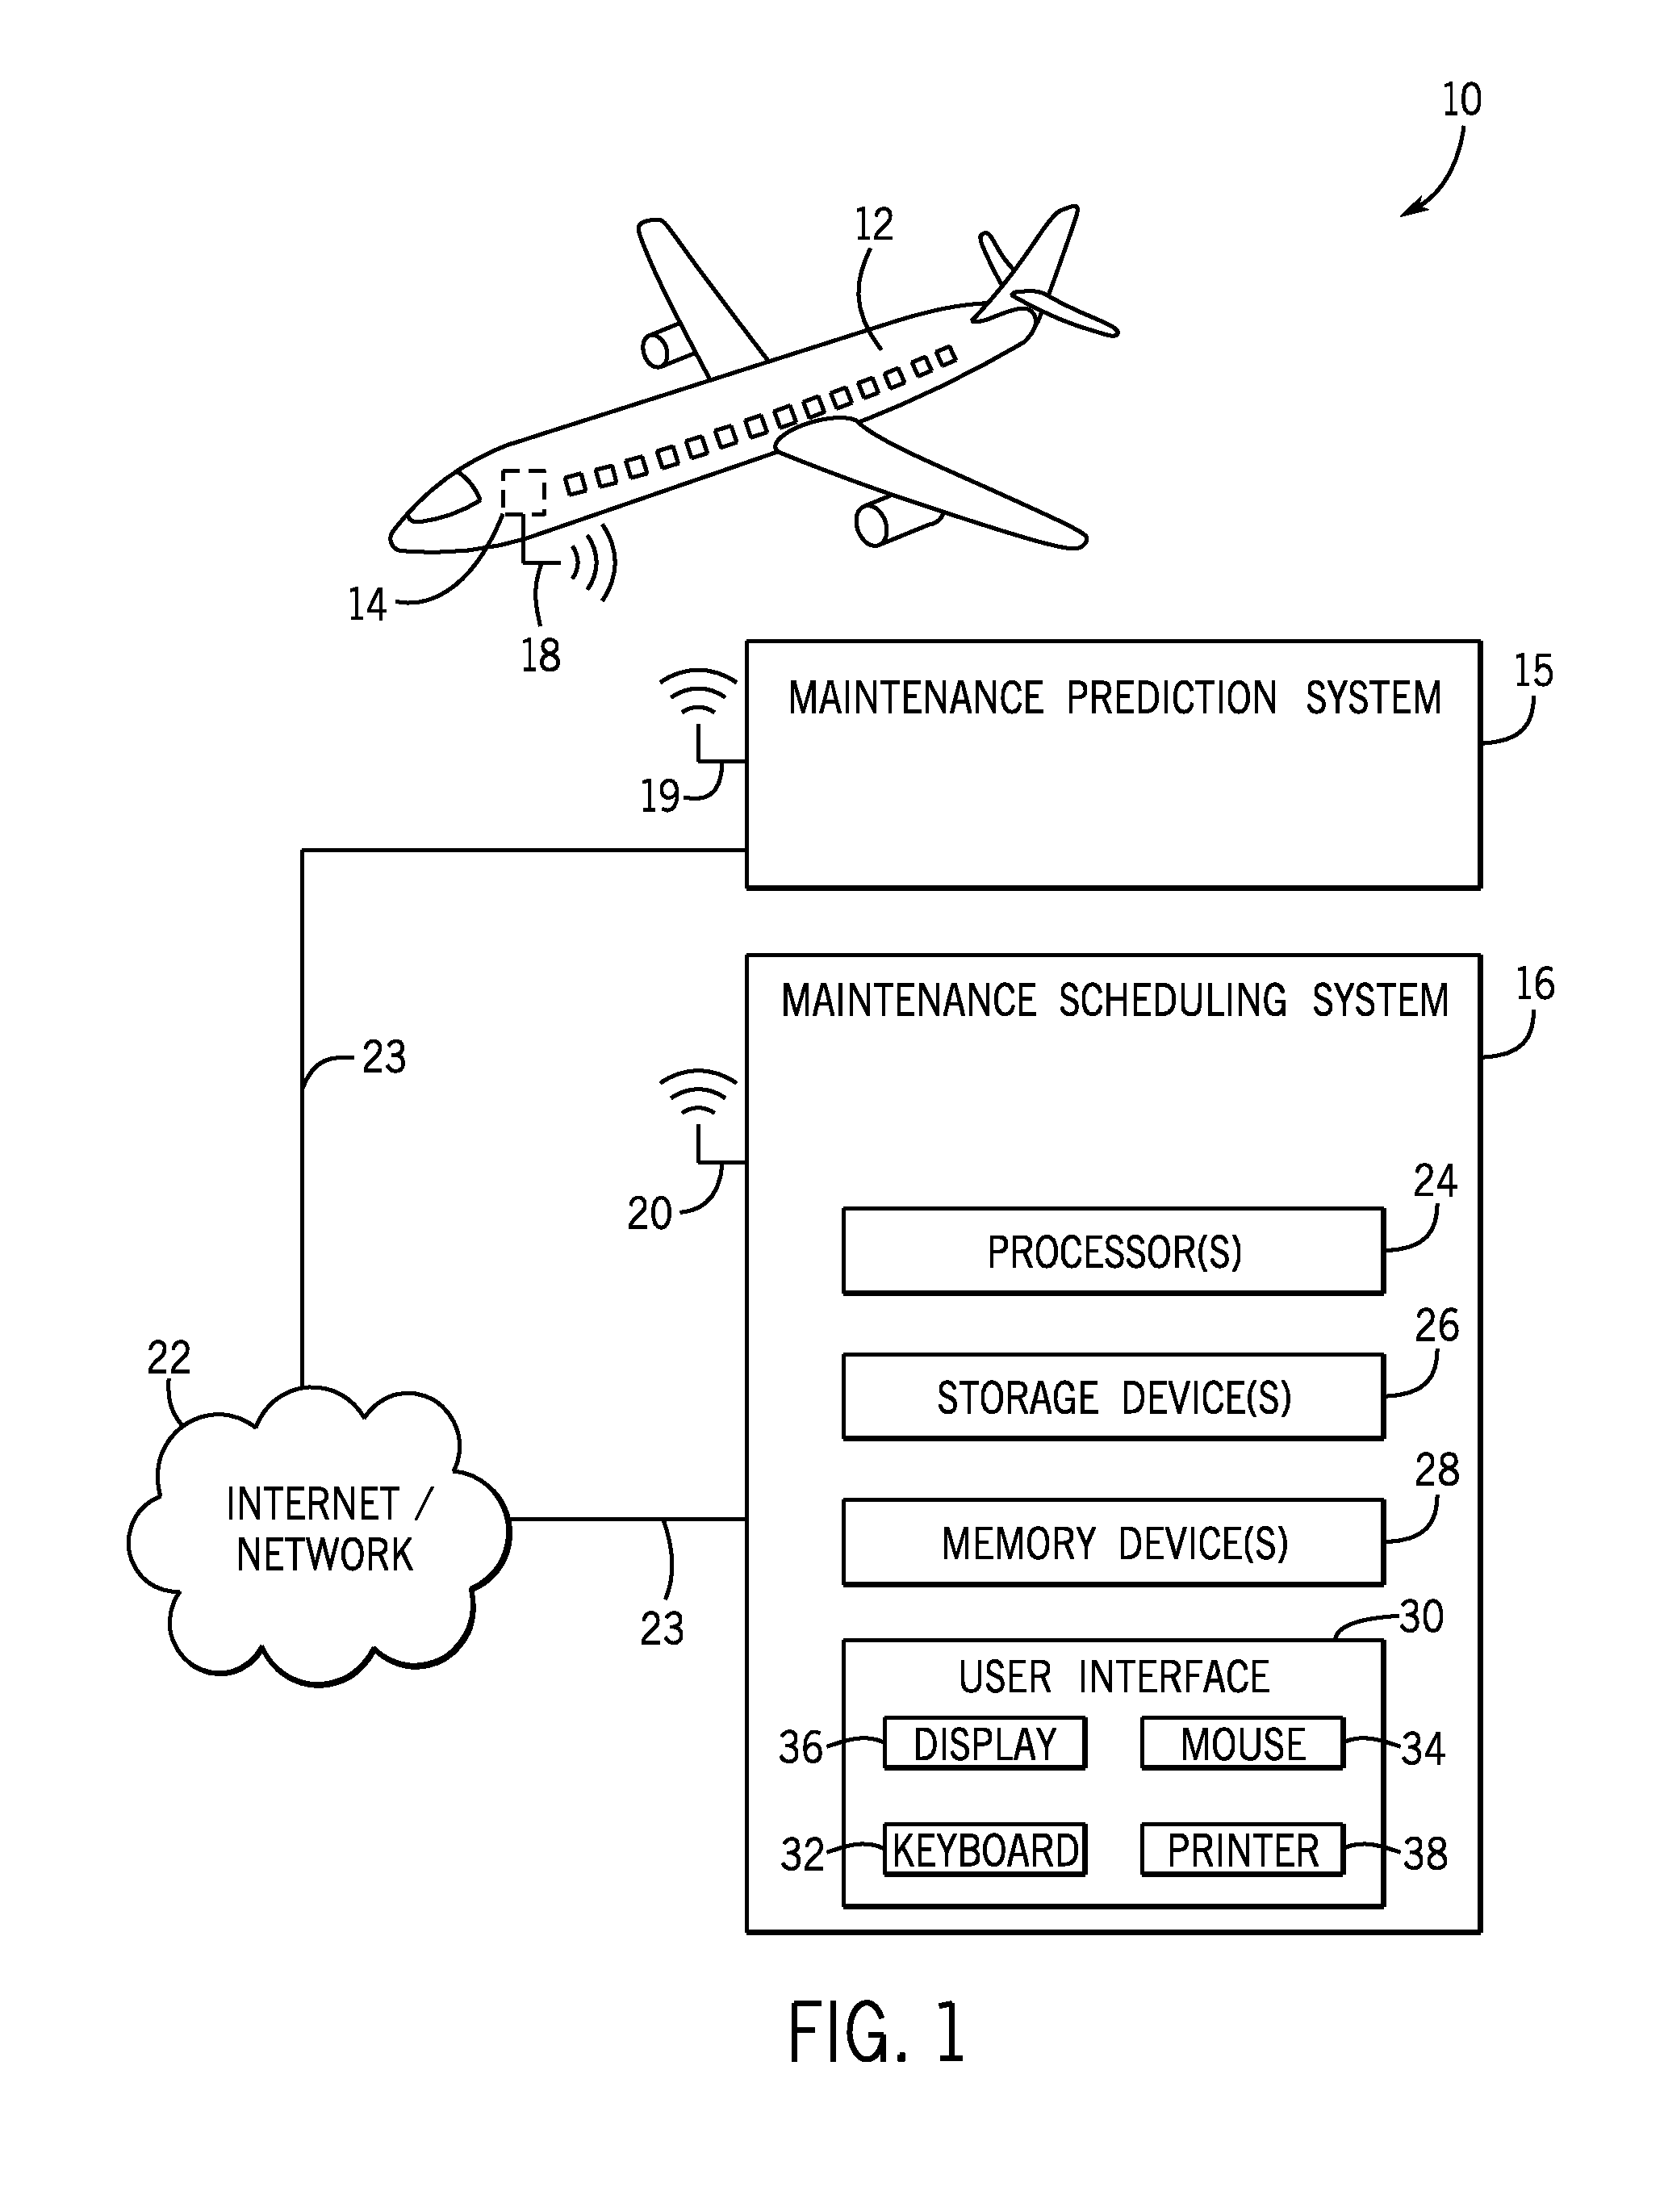 System, method, and apparatus for scheduling aircraft maintenance events